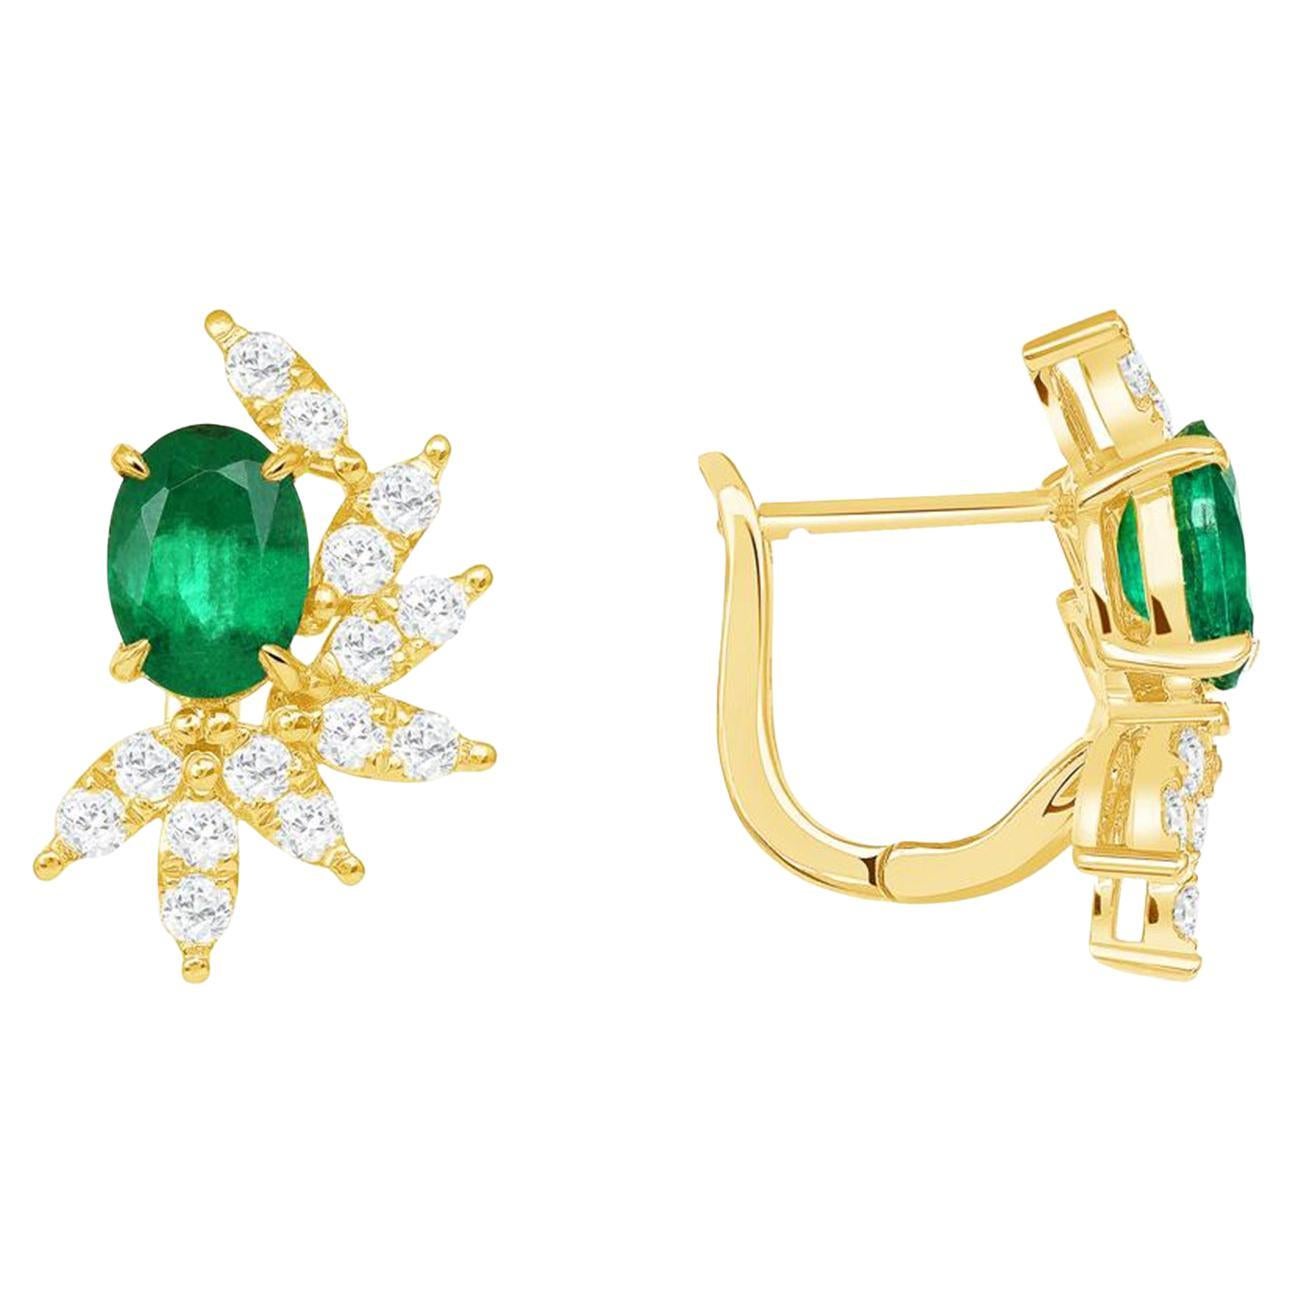 1.24 CT Natural Colombian Emerald 0.69 CT Diamonds 14K Yellow Gold Earrings